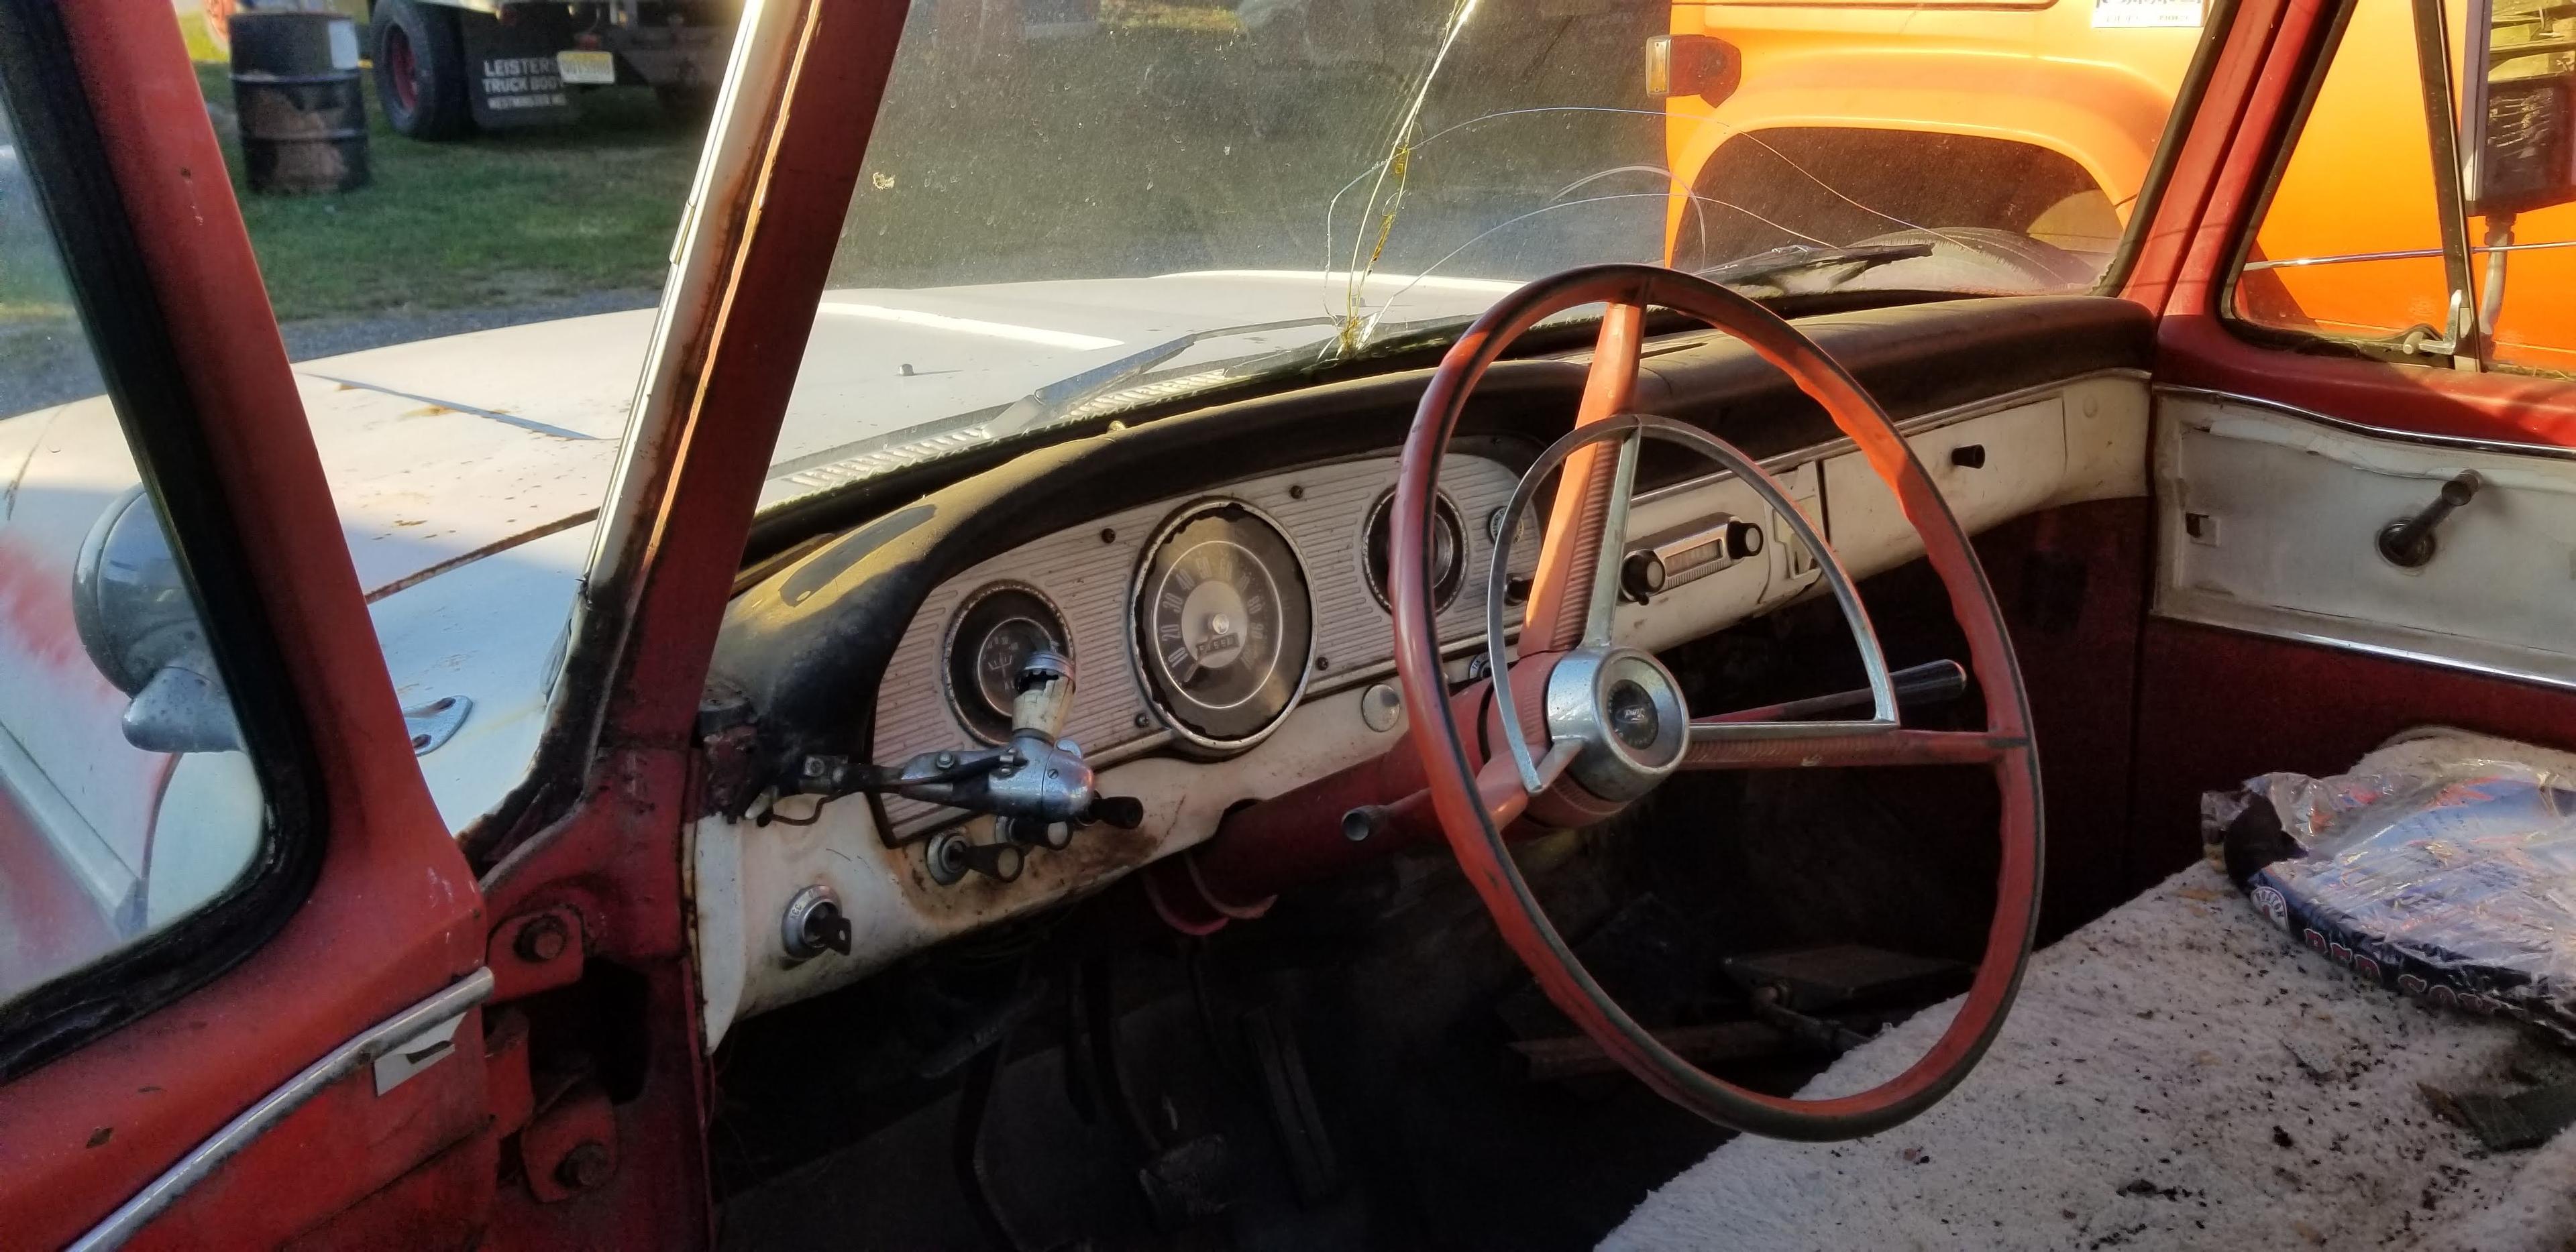 1966 Ford 100 Pickup W/Title